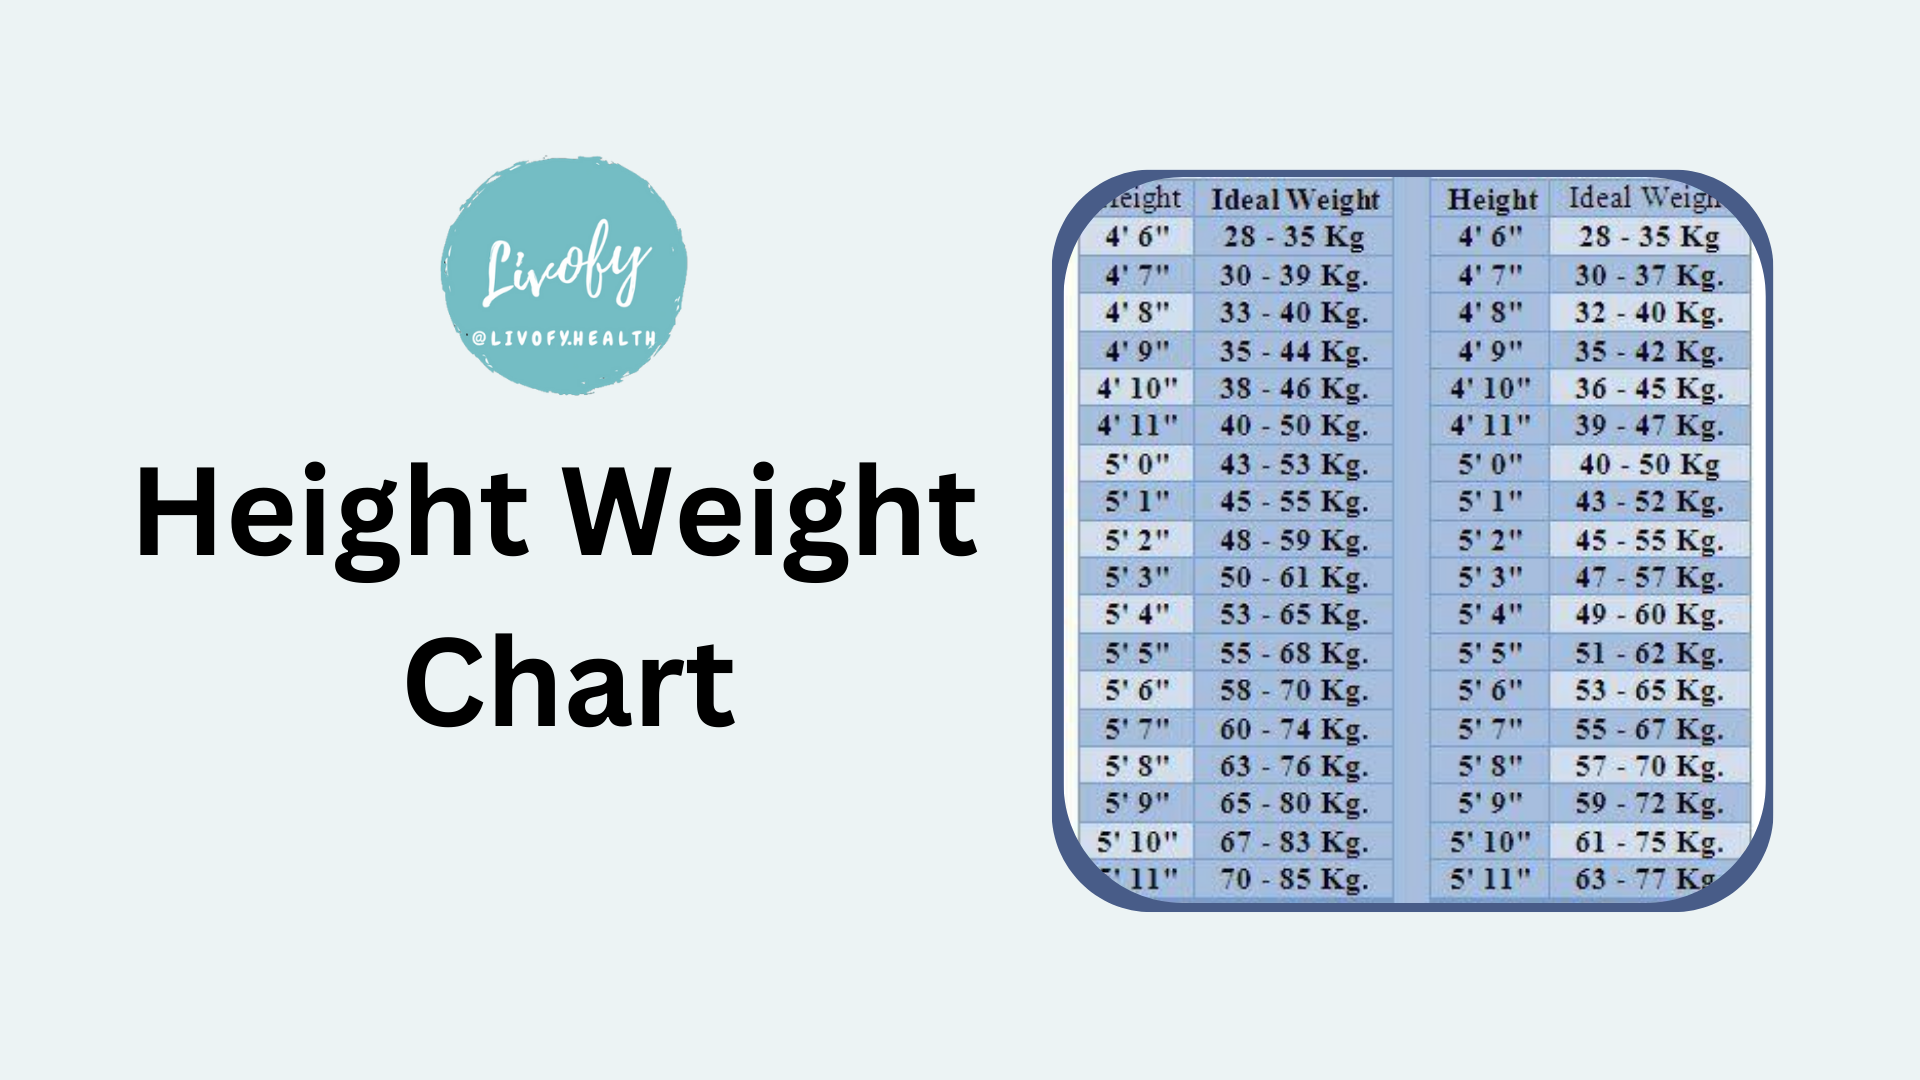 healthy body weight chart